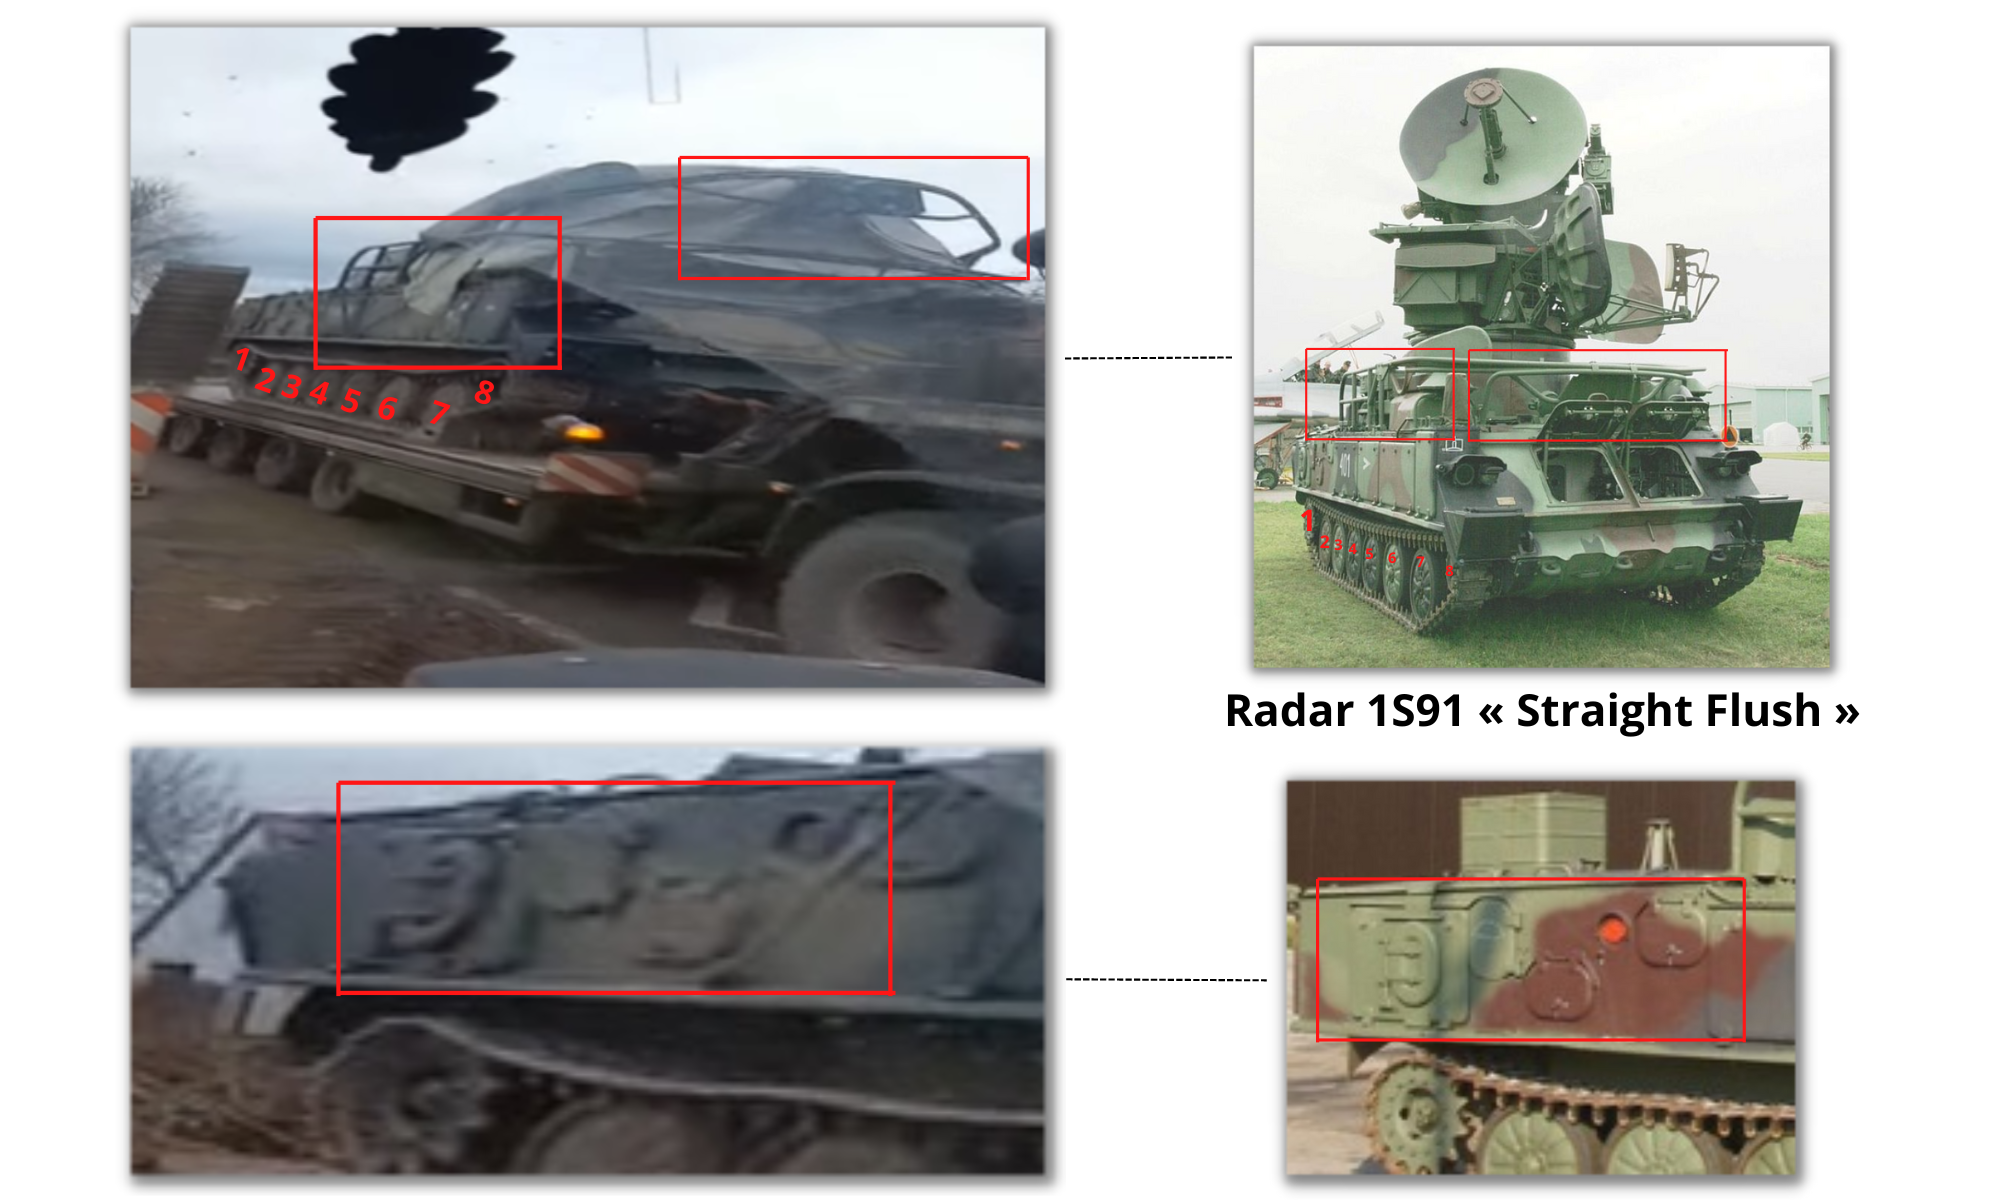 The visible vehicle corresponds to a Russian-made 1S91 radar.